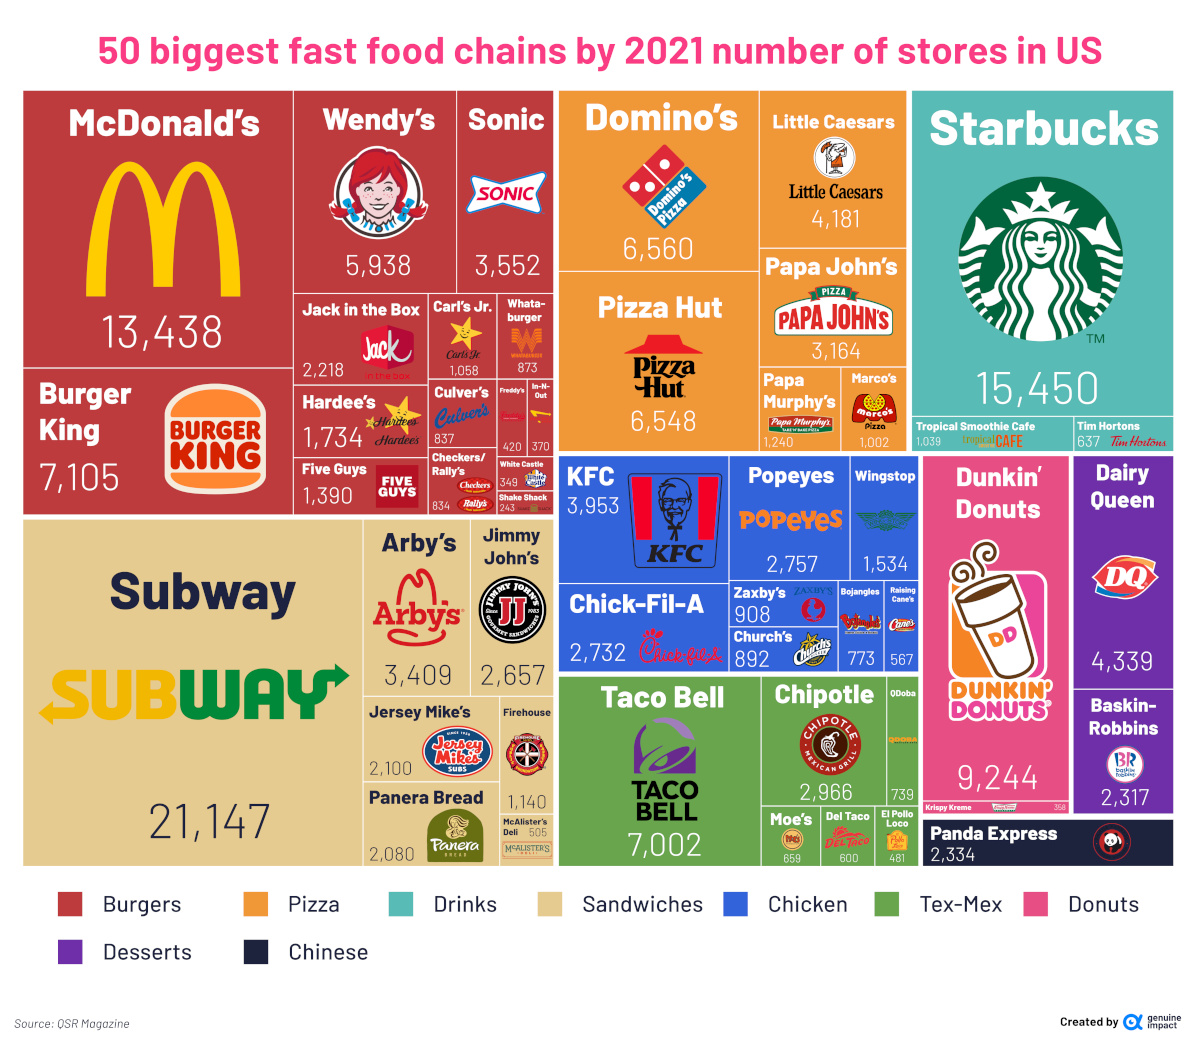 Most Popular Fast Food Joints in the U.S.